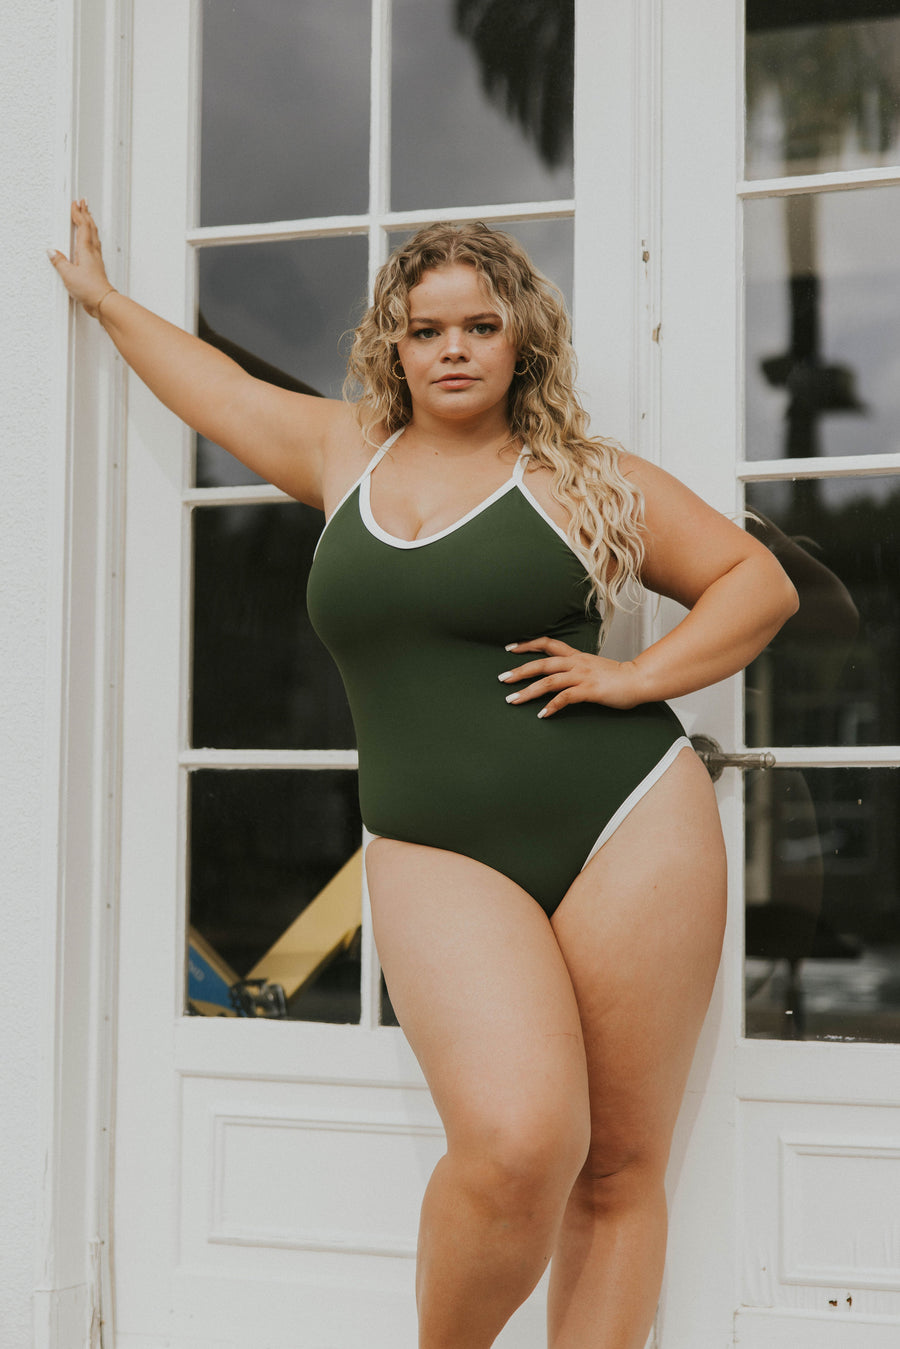 How to shop for the best swimsuit for body type